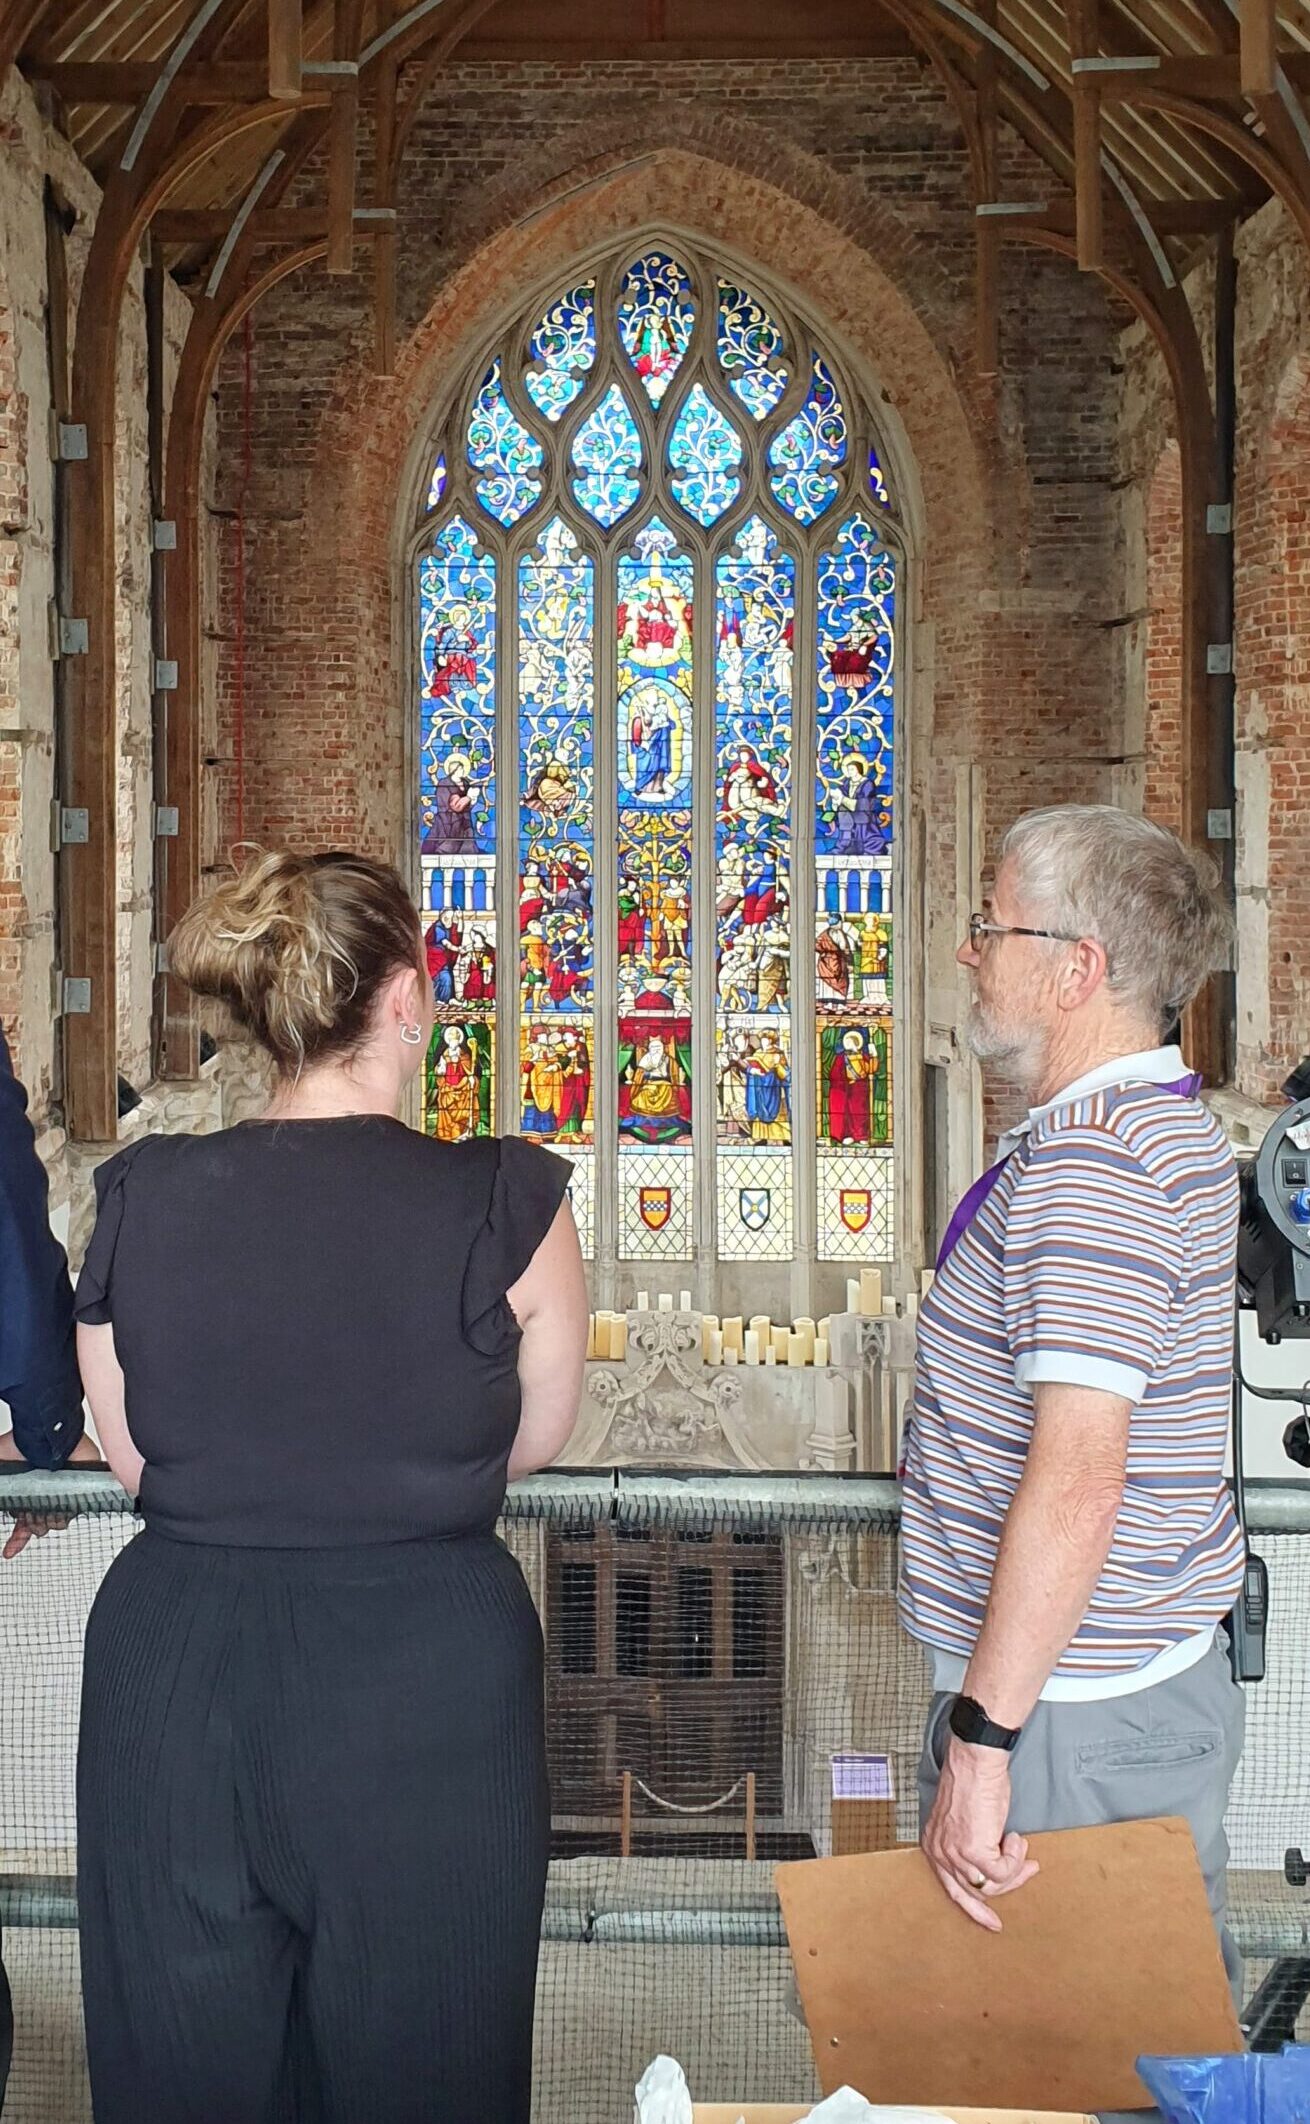 Tour guide in front of stained glass window with visitors